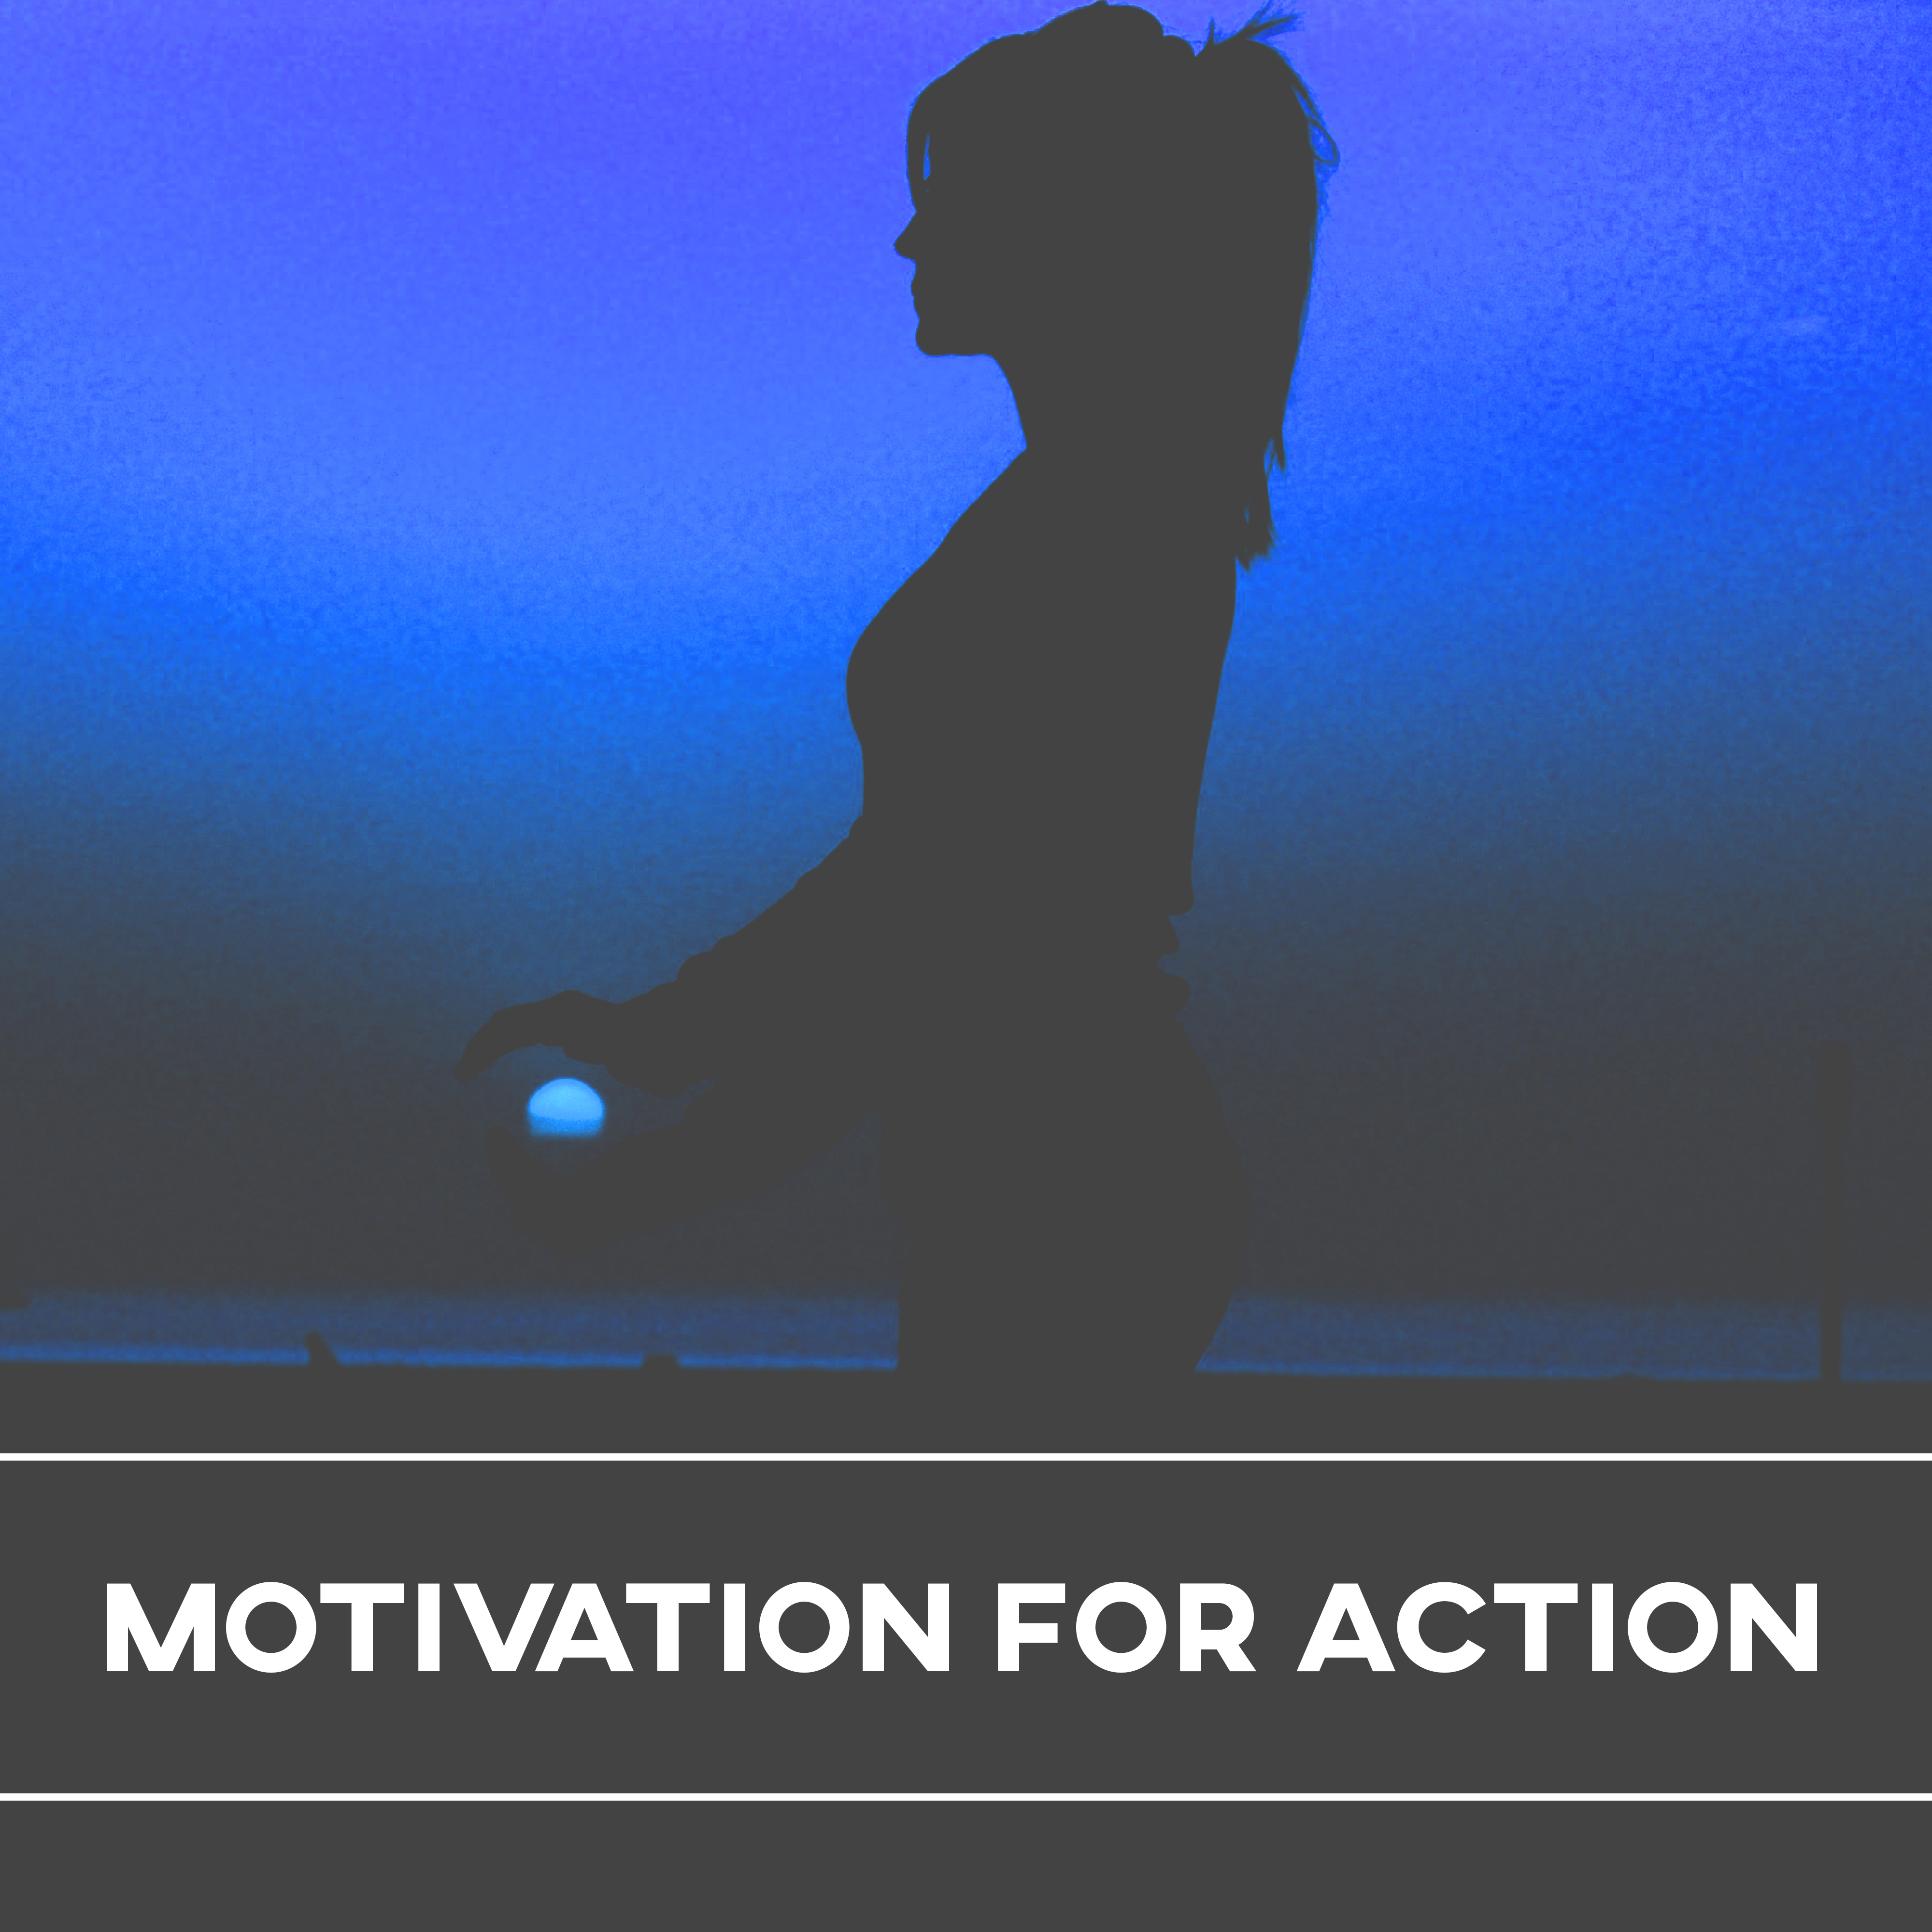 Motivation for Action - After Resting, Exercises, Focus, New Energy, Surroundings of Nature